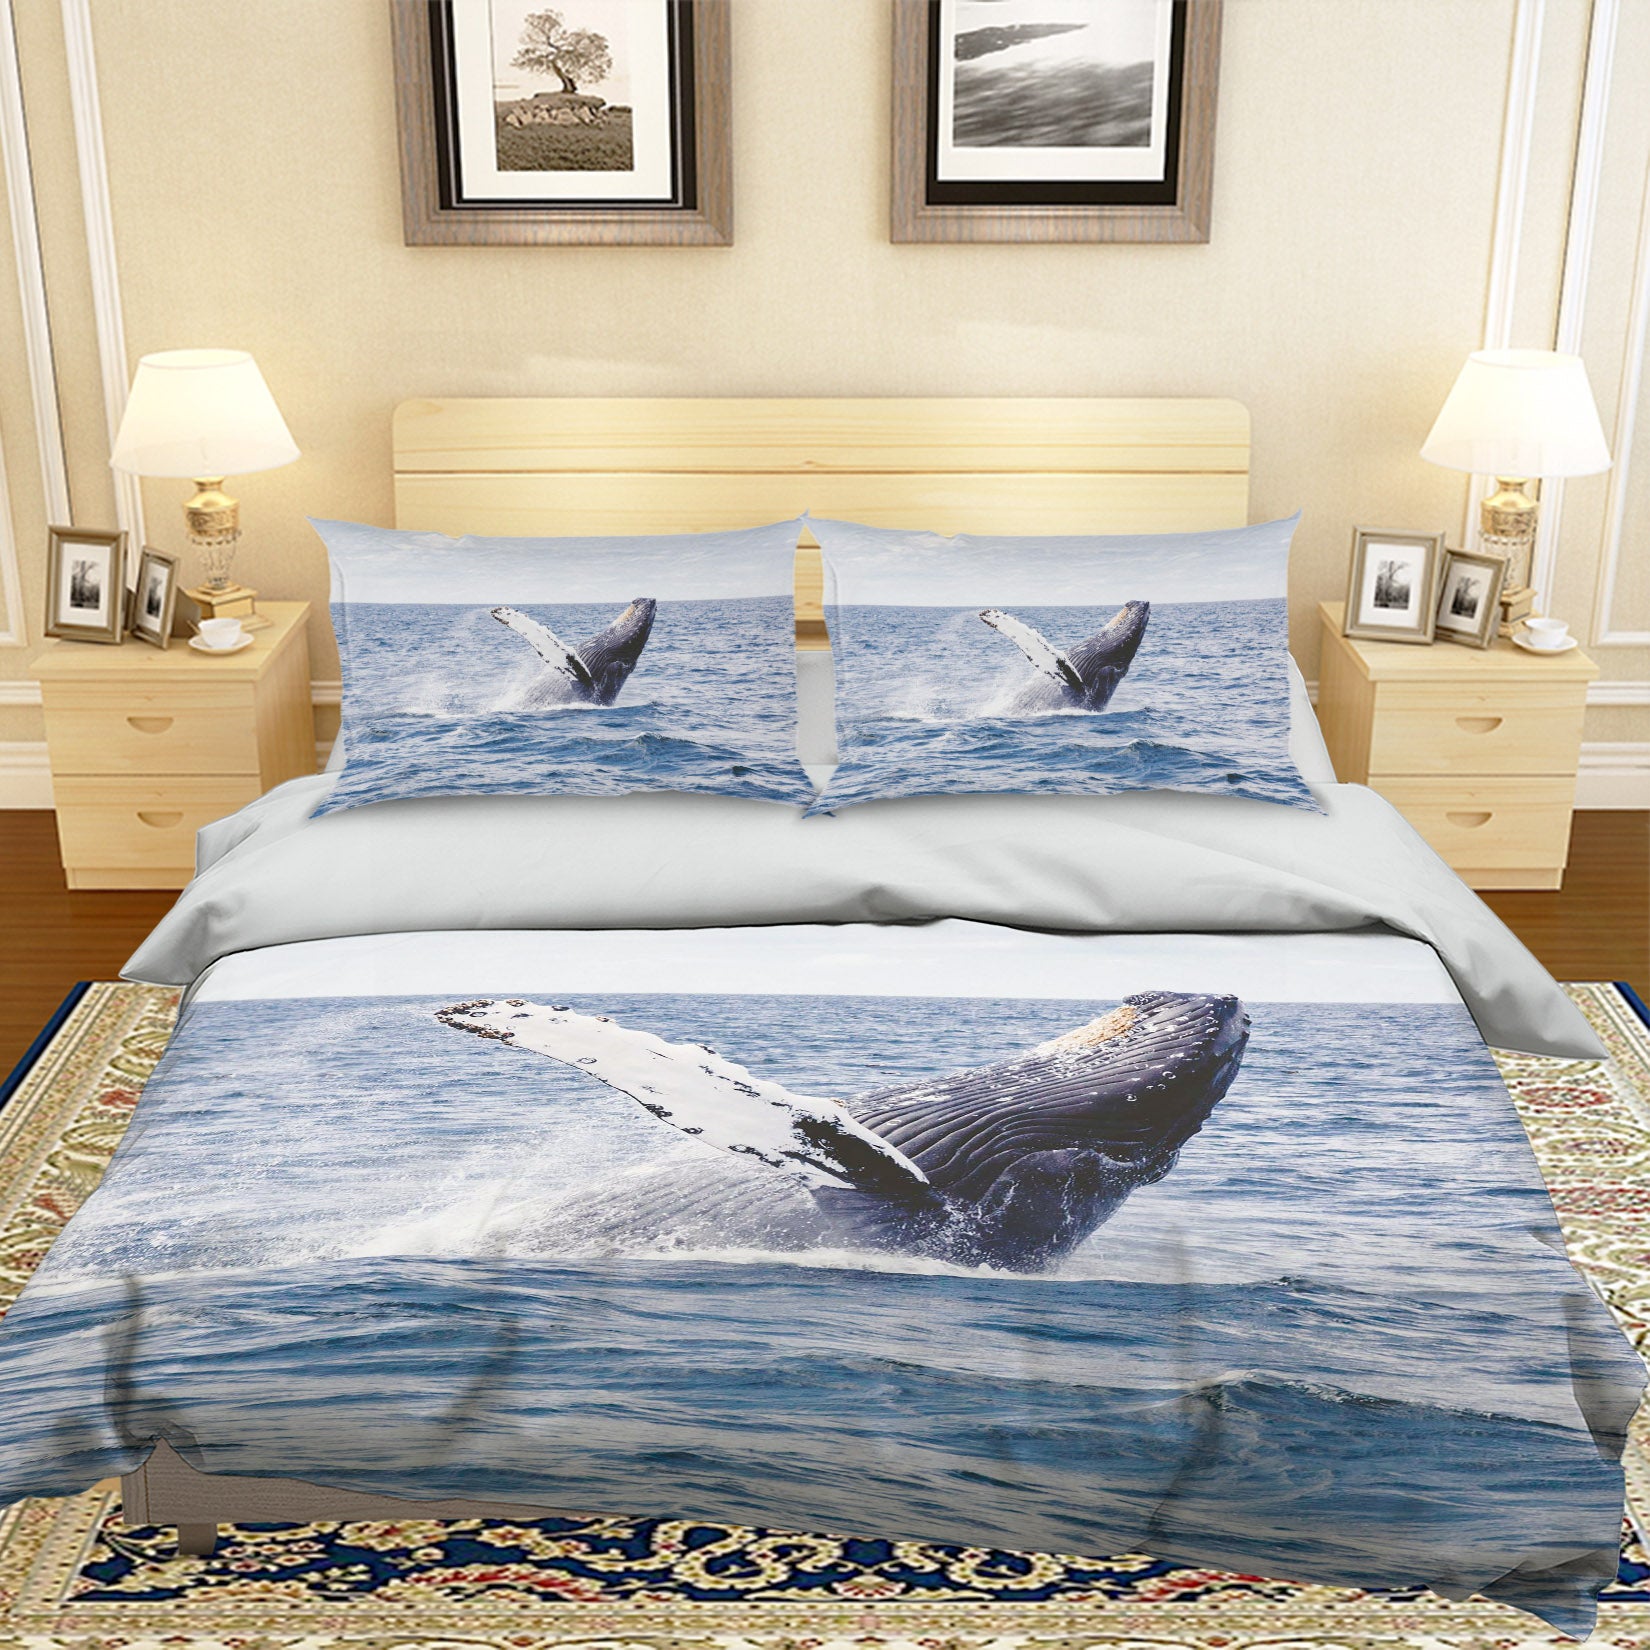 3D Humpback Whale 070 Bed Pillowcases Quilt